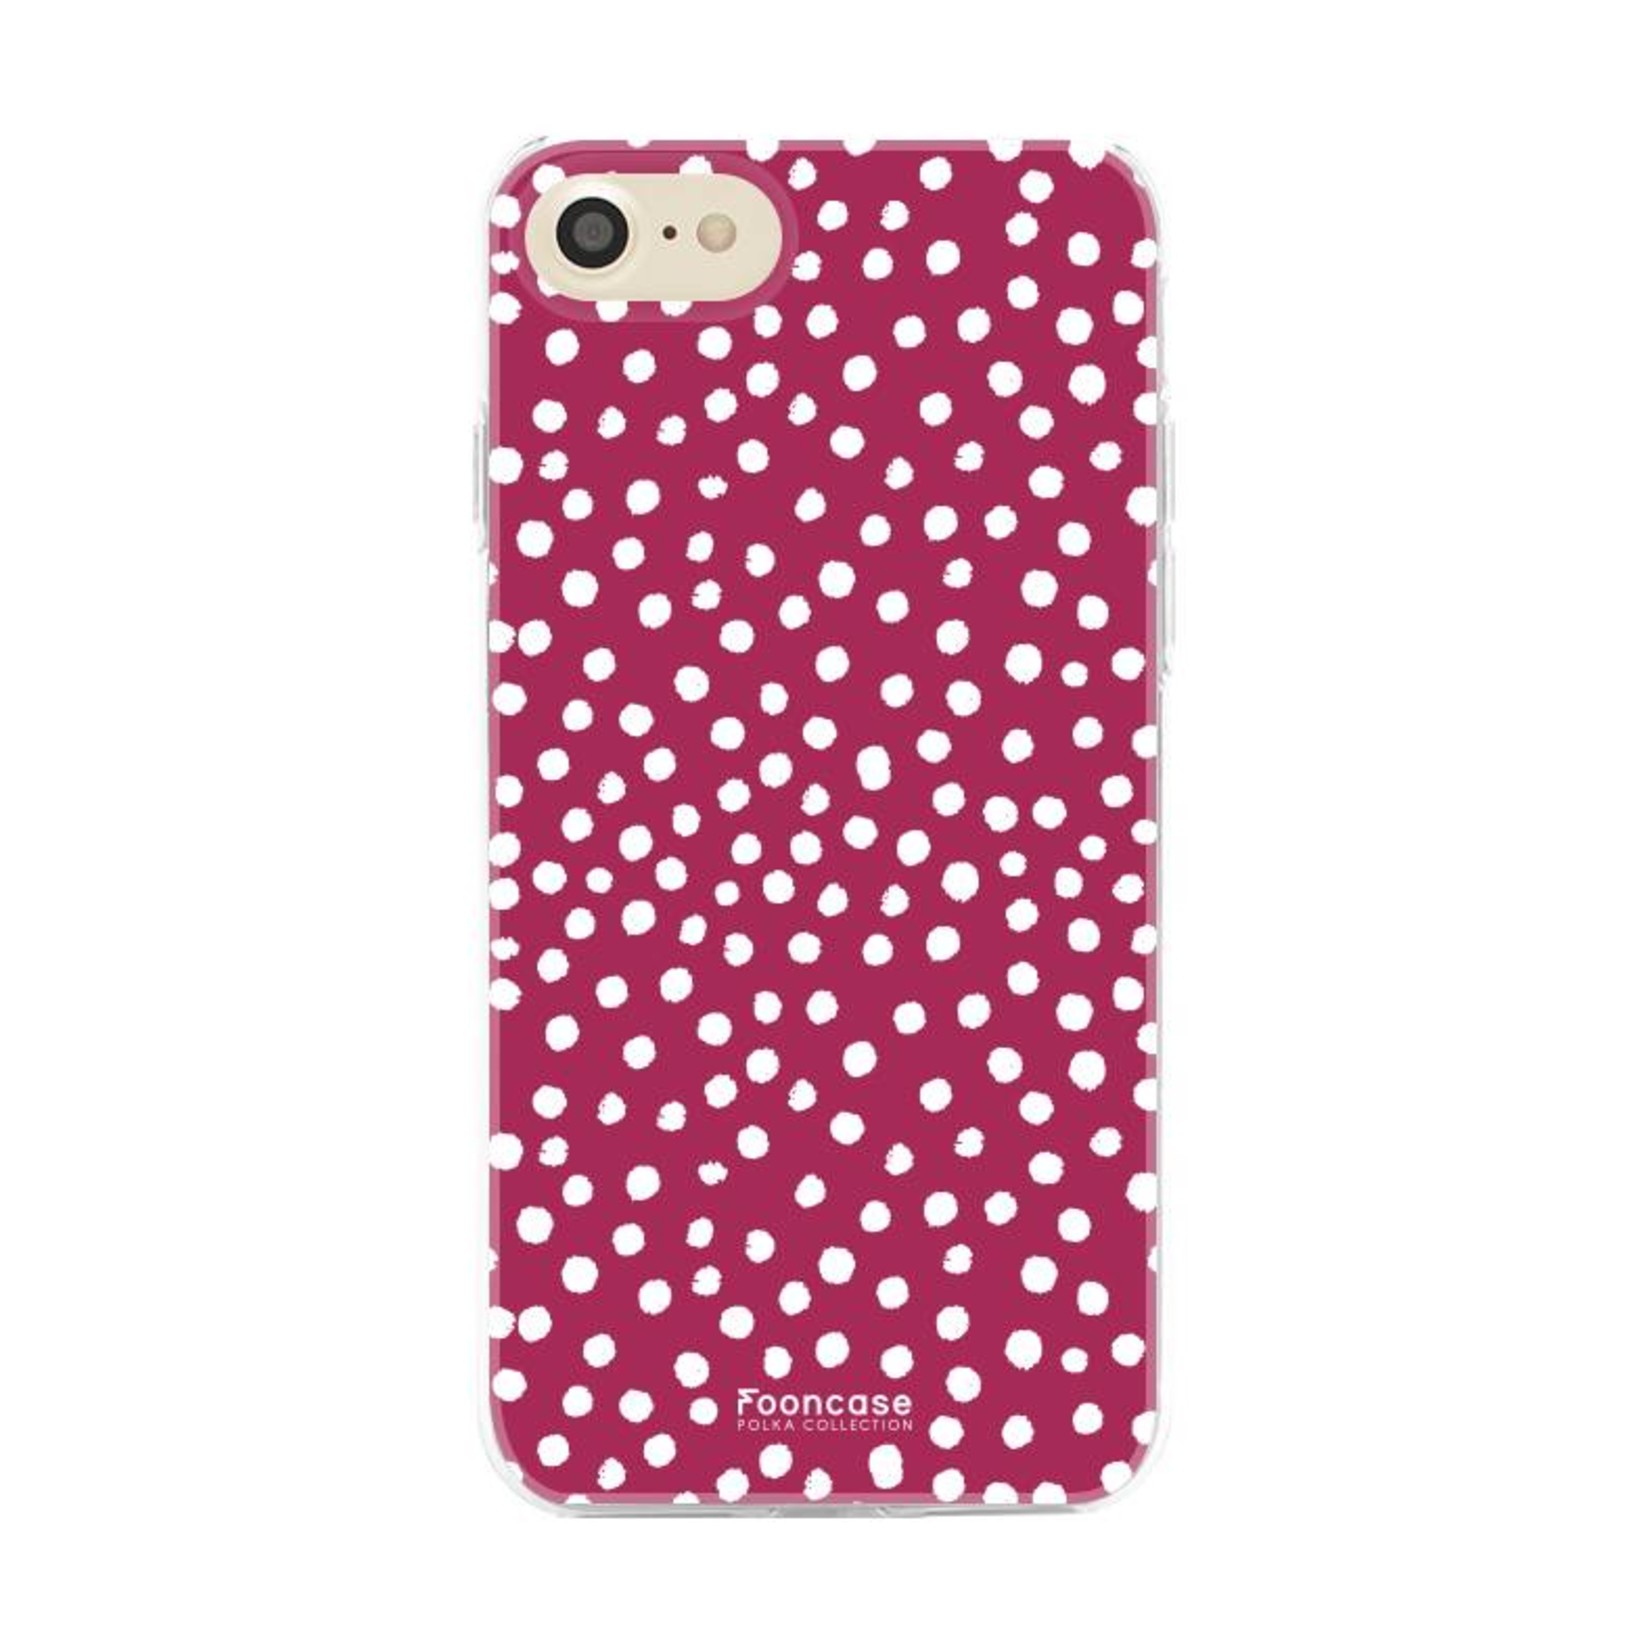 FOONCASE Iphone 8 - POLKA COLLECTION / Bordeaux Red